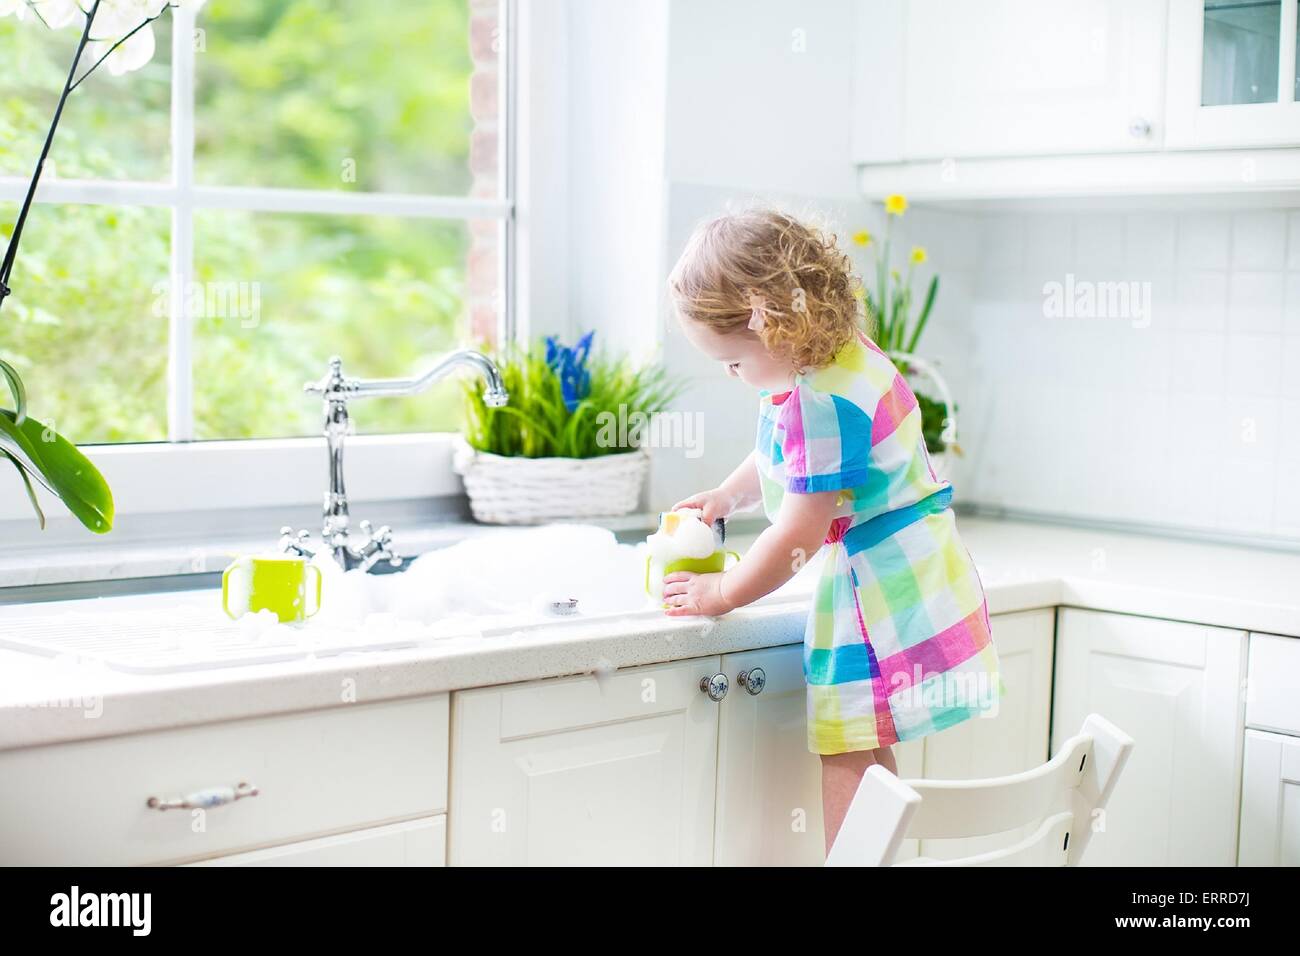 Child washing dishes. Kids wash plates and cups. Little girl helping in the kitchen playing with water and foam in a white sink Stock Photo